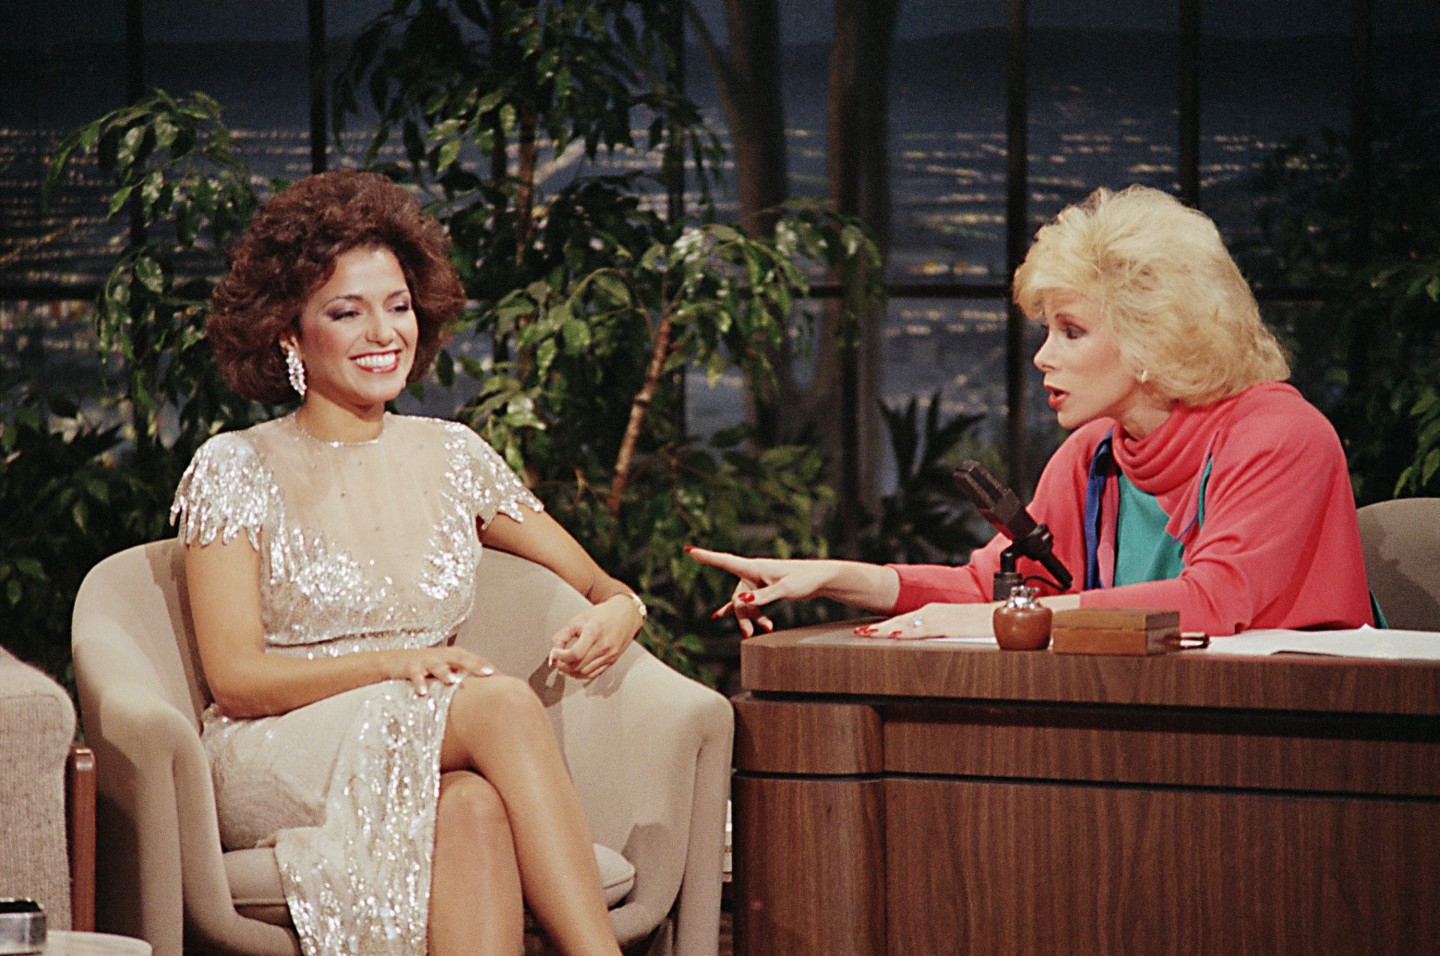 Rivers became permanent guest host for <em>The Tonight Show</em> in 1983, a gig that ended when she left to host her own late-night show on Fox. Here she interviews Miss America Suzette Charles in 1984.